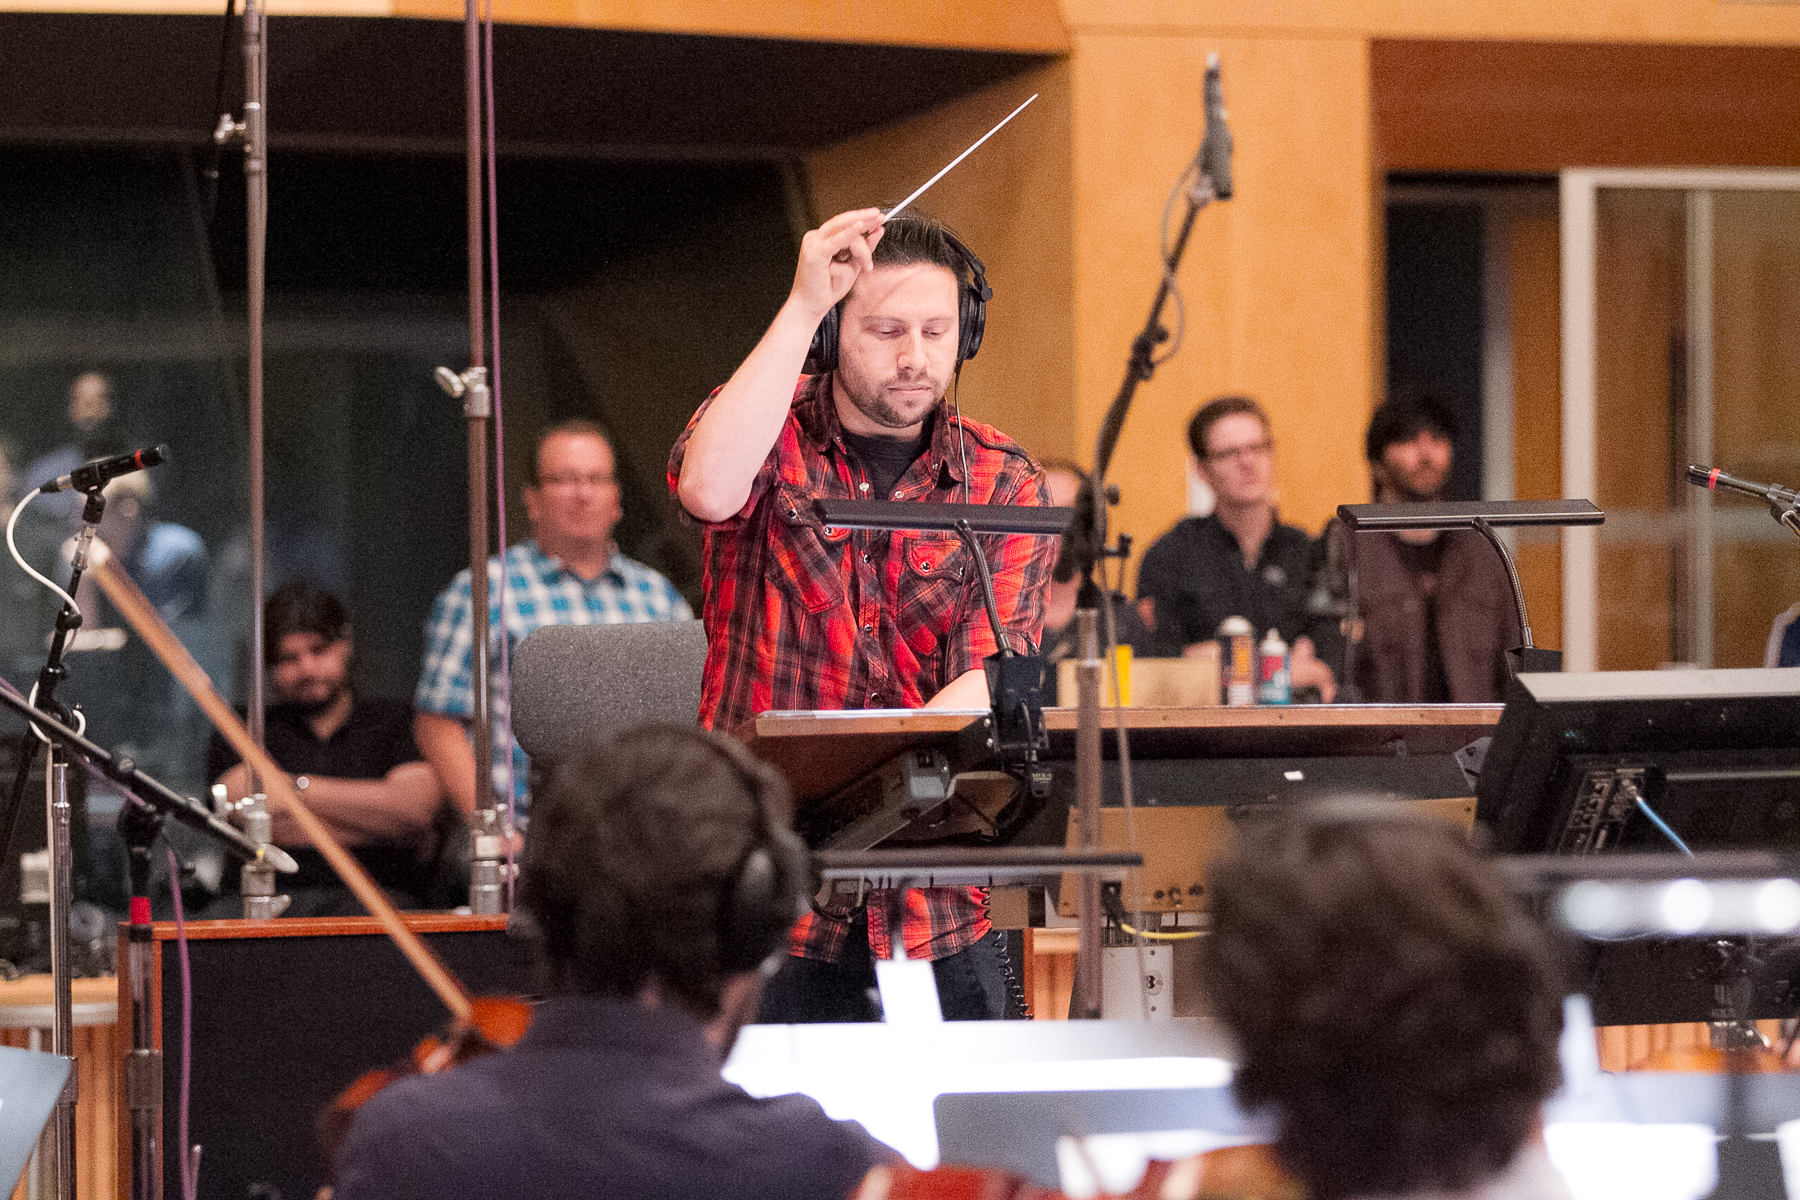 Conducting the Hollywood Studio Symphony at Fox's Newman Scoring Stage, as part of the ASCAP Film Scoring Workshop. Aug 1, 2014